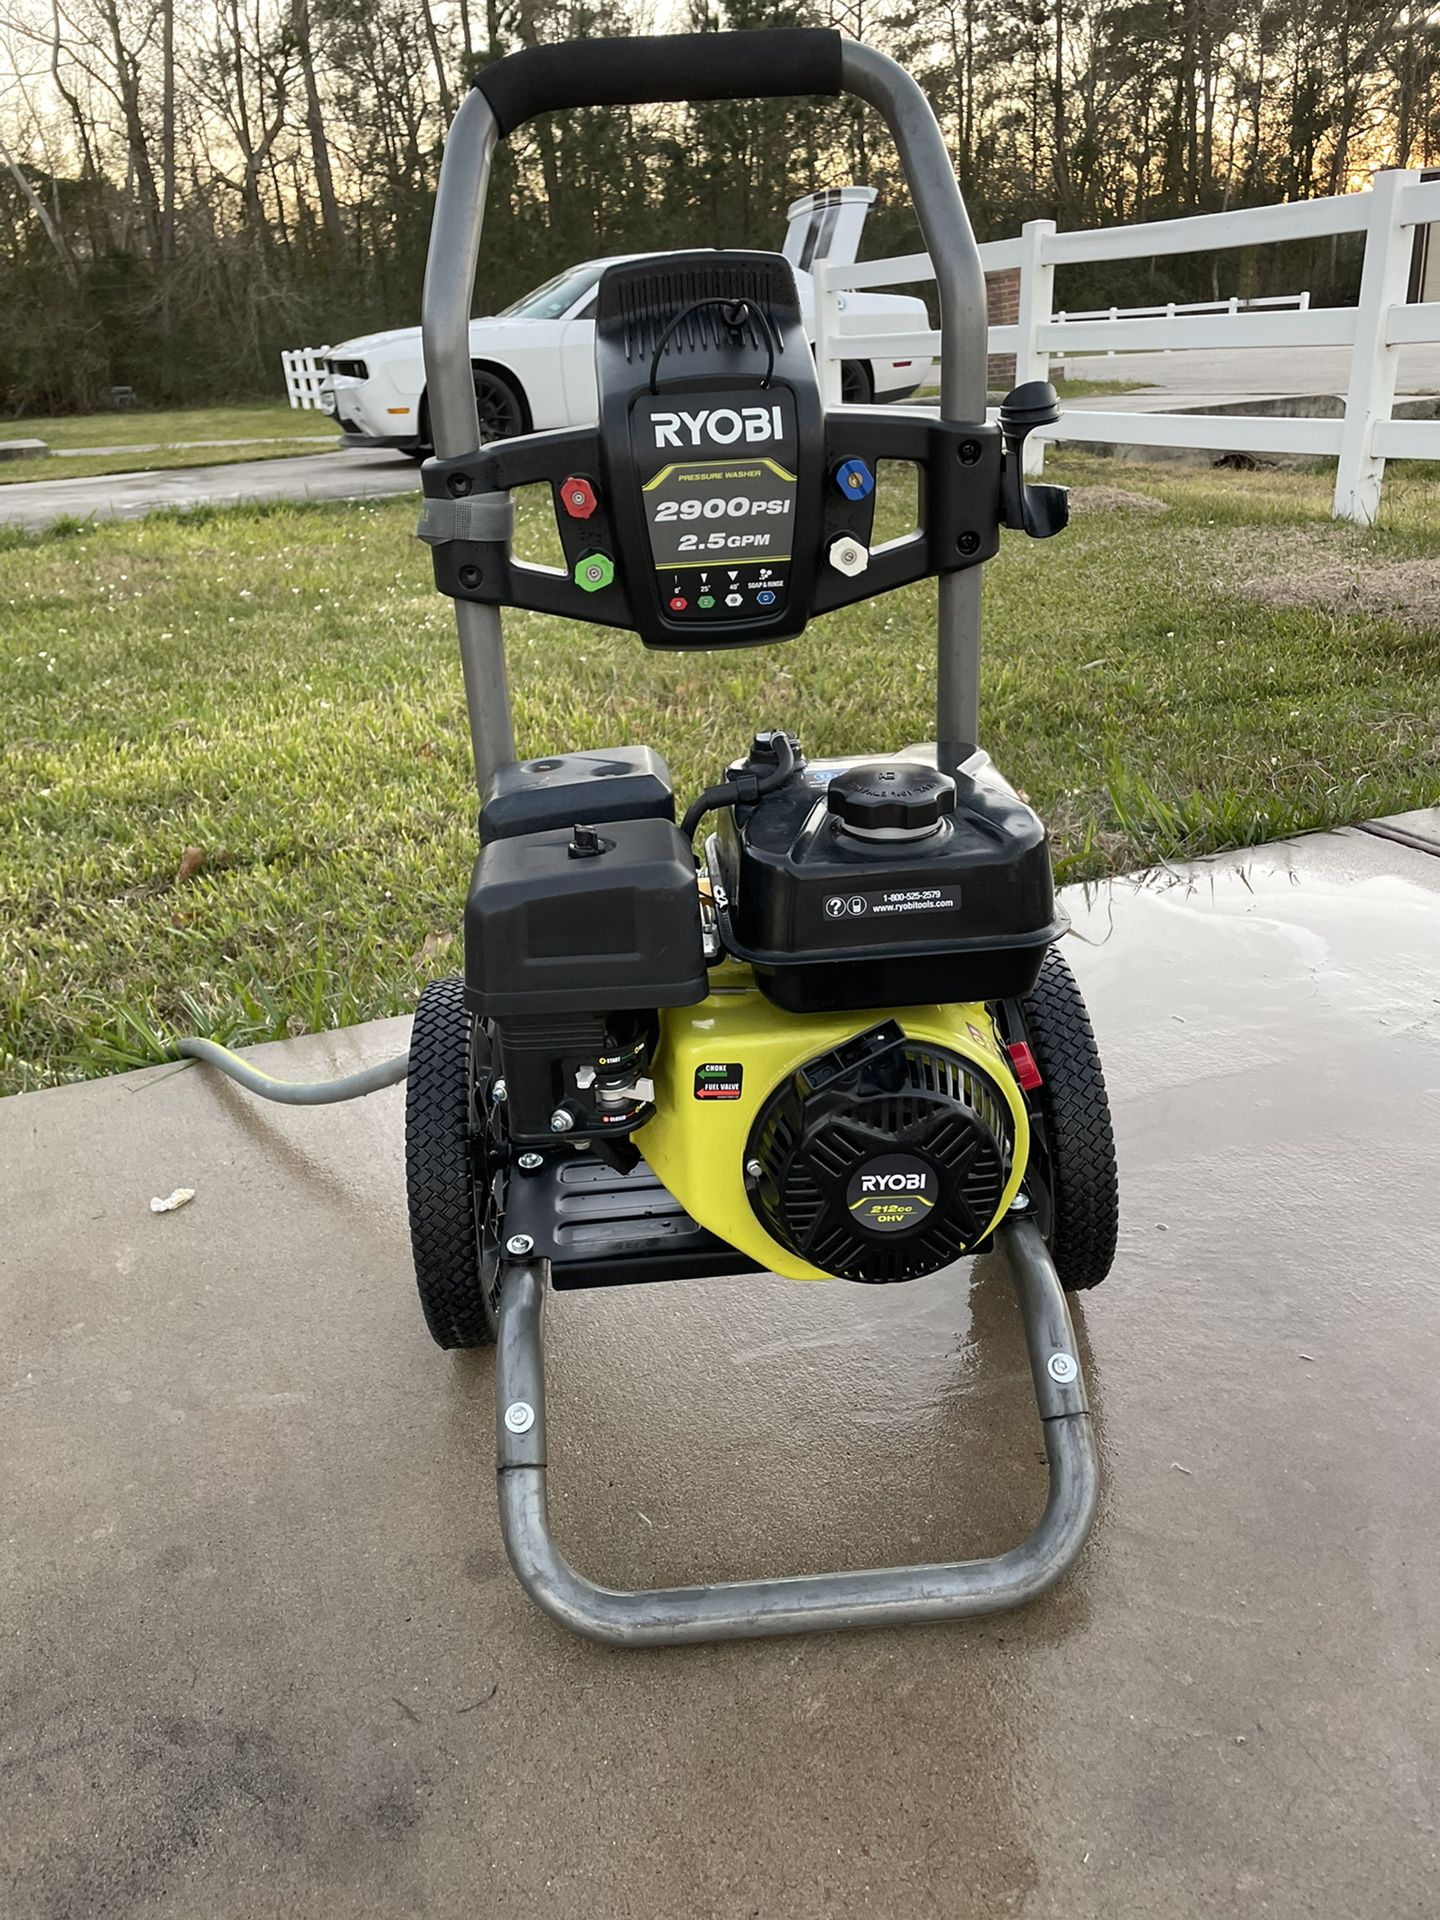 RYOBI Power Washer for Sale in Humble, TX - OfferUp